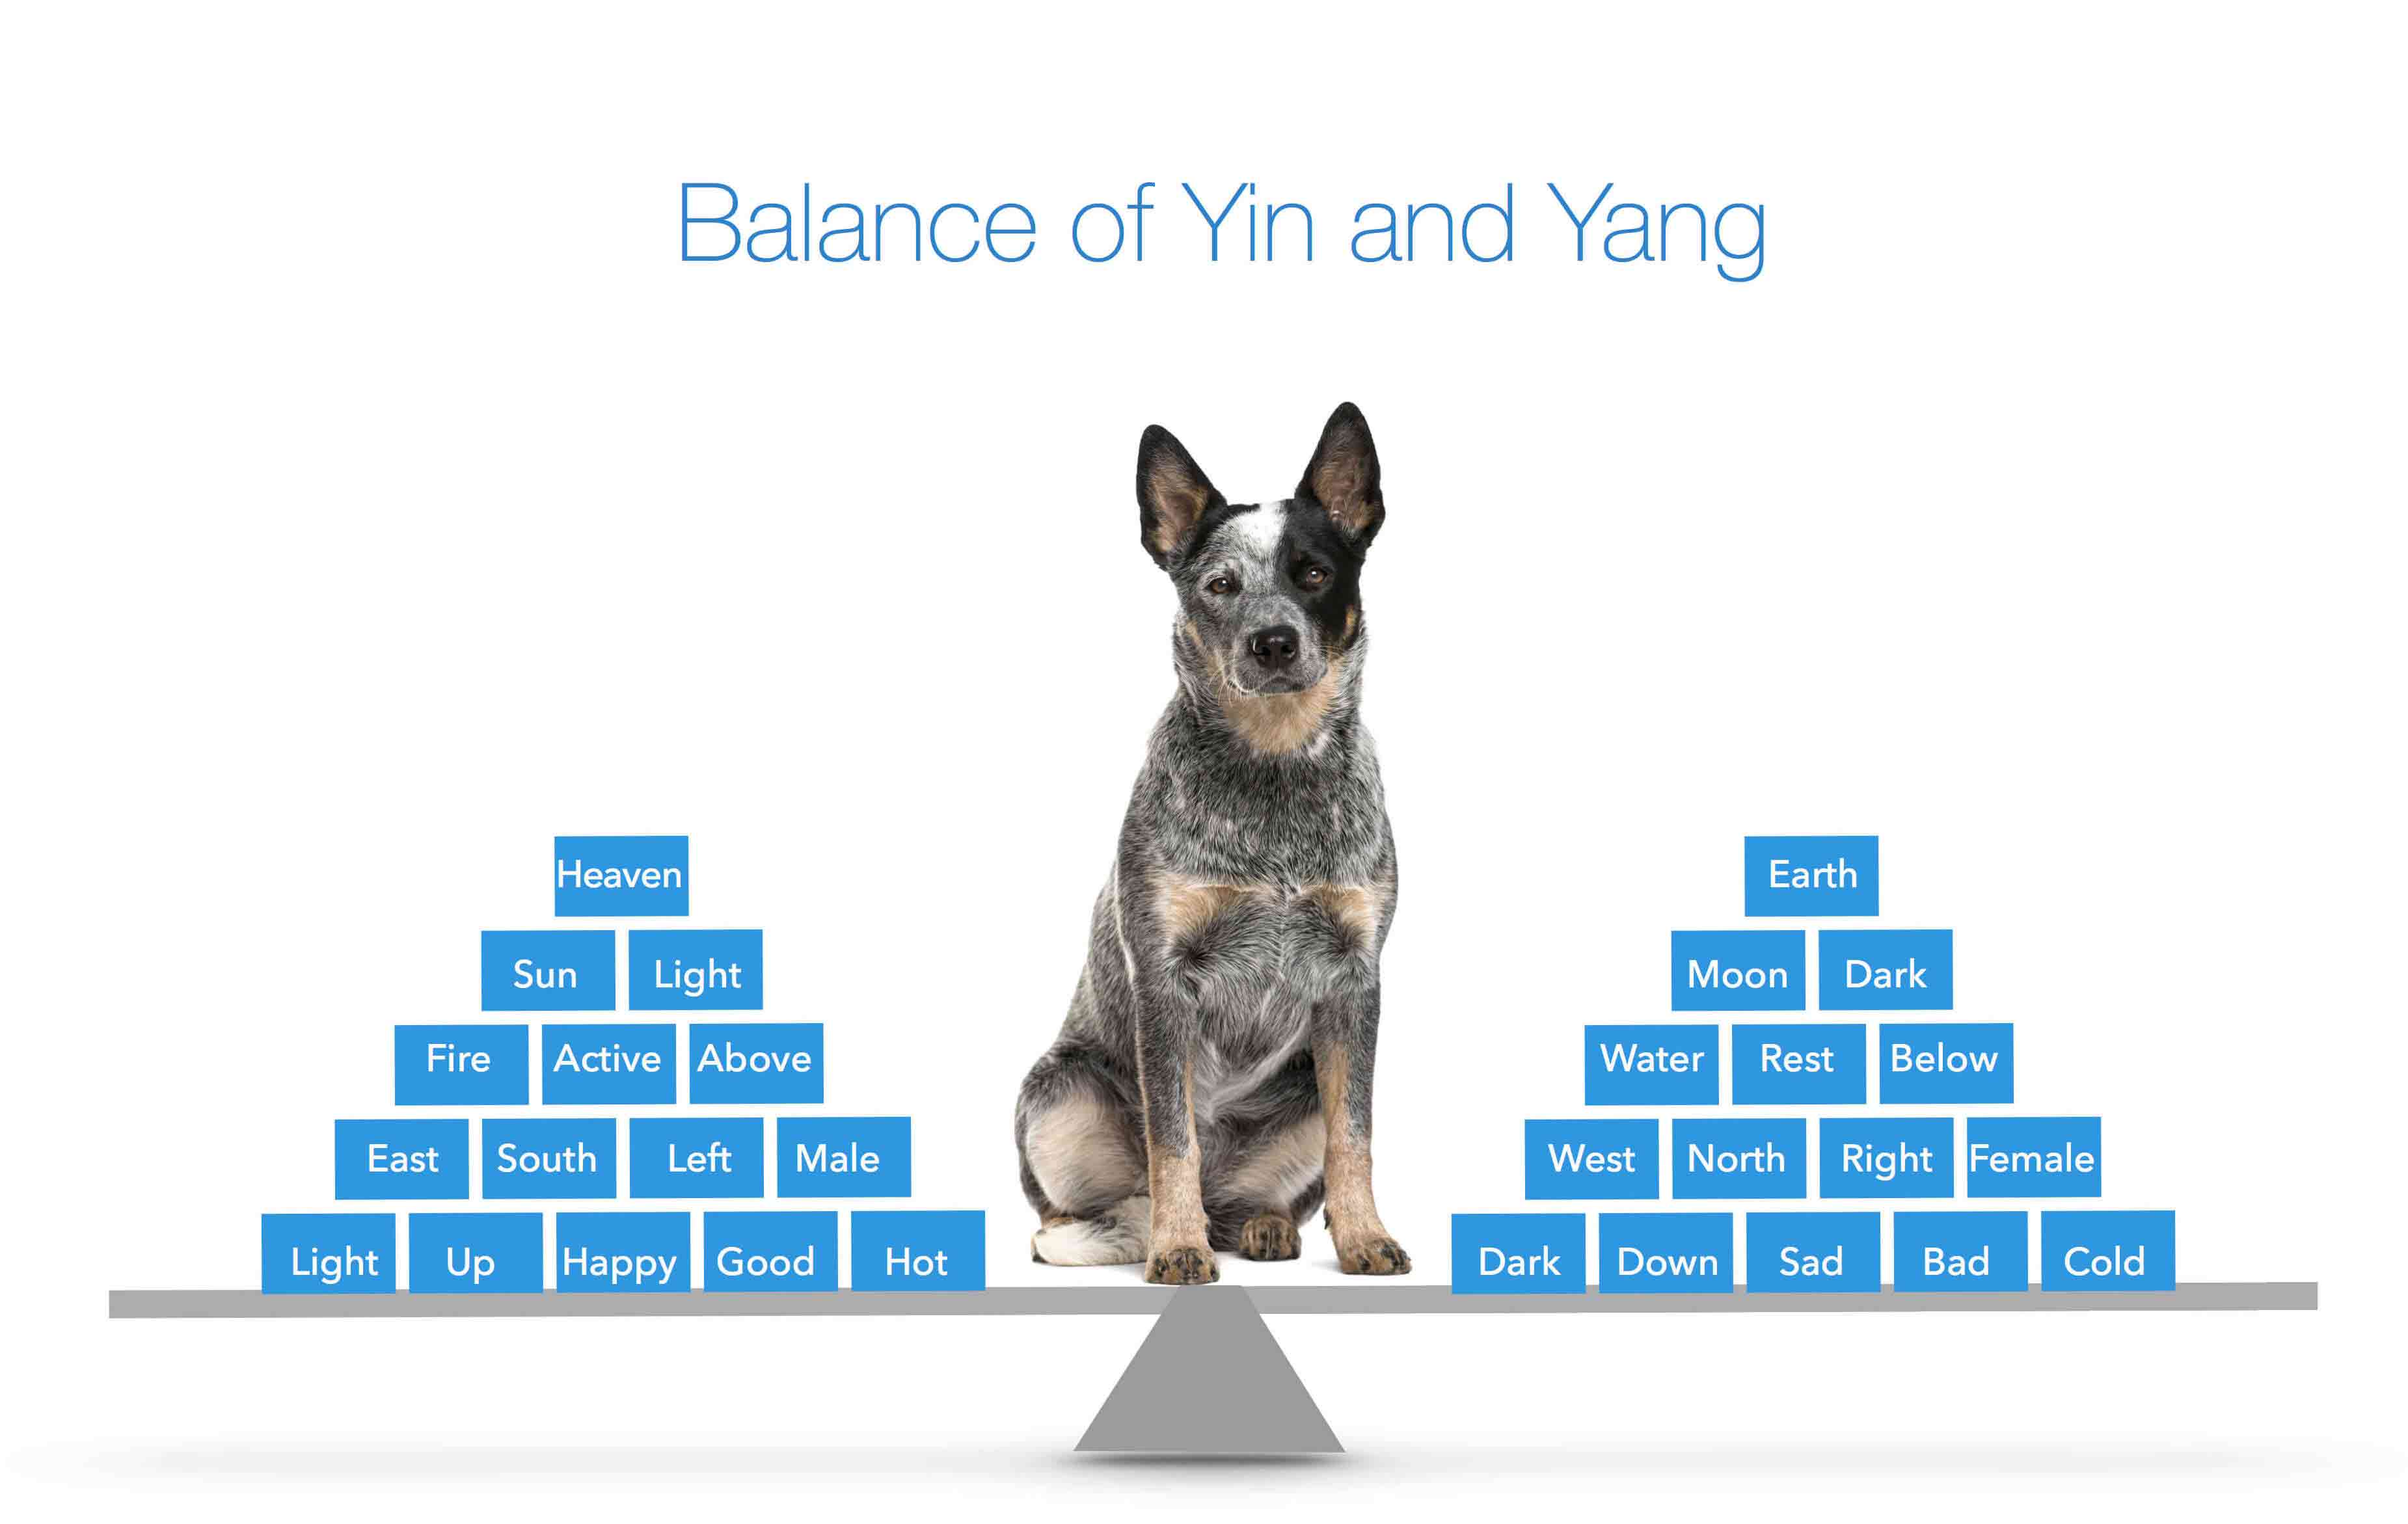 Yin and Yang Theory for Dogs